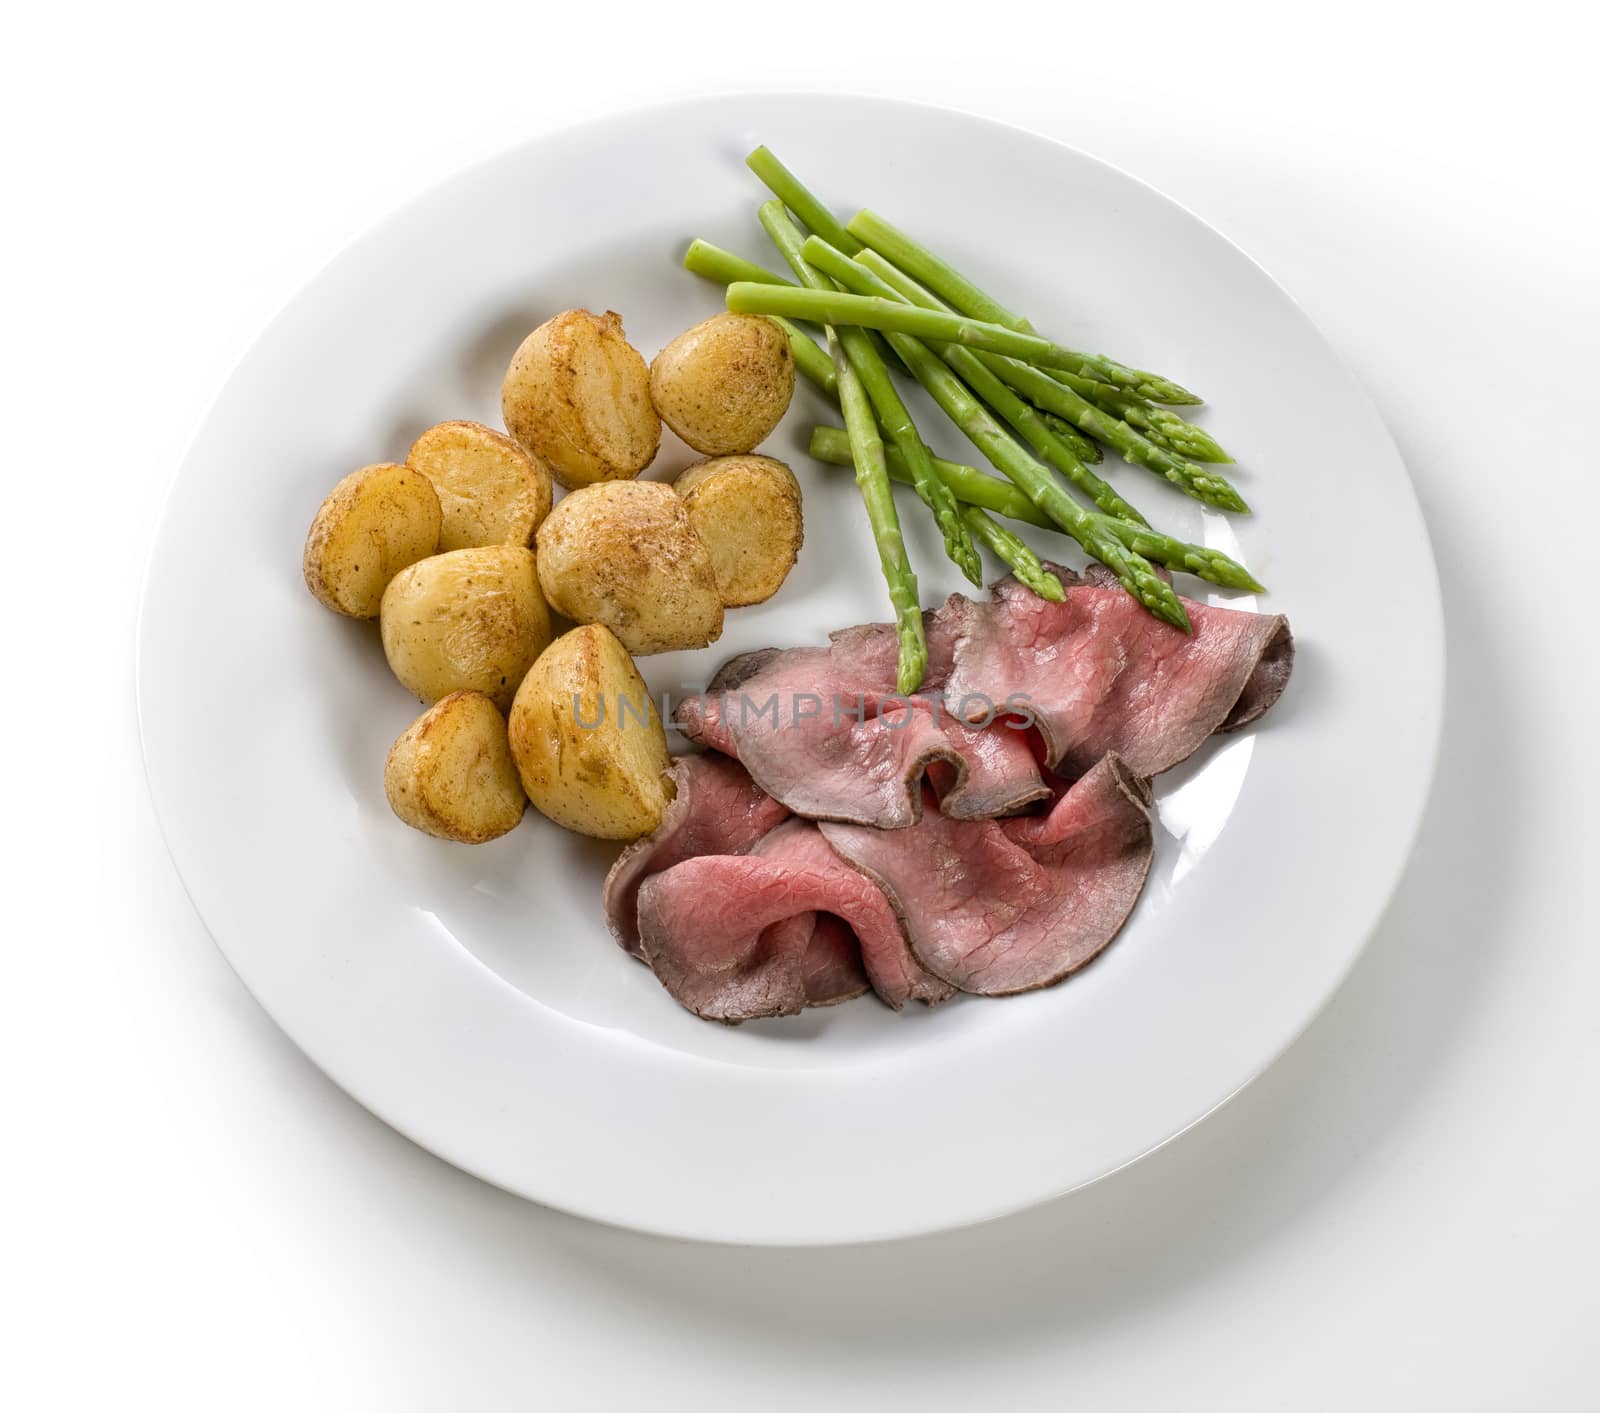 Roast with beef potatoes and asparagus on a white background by janssenkruseproductions